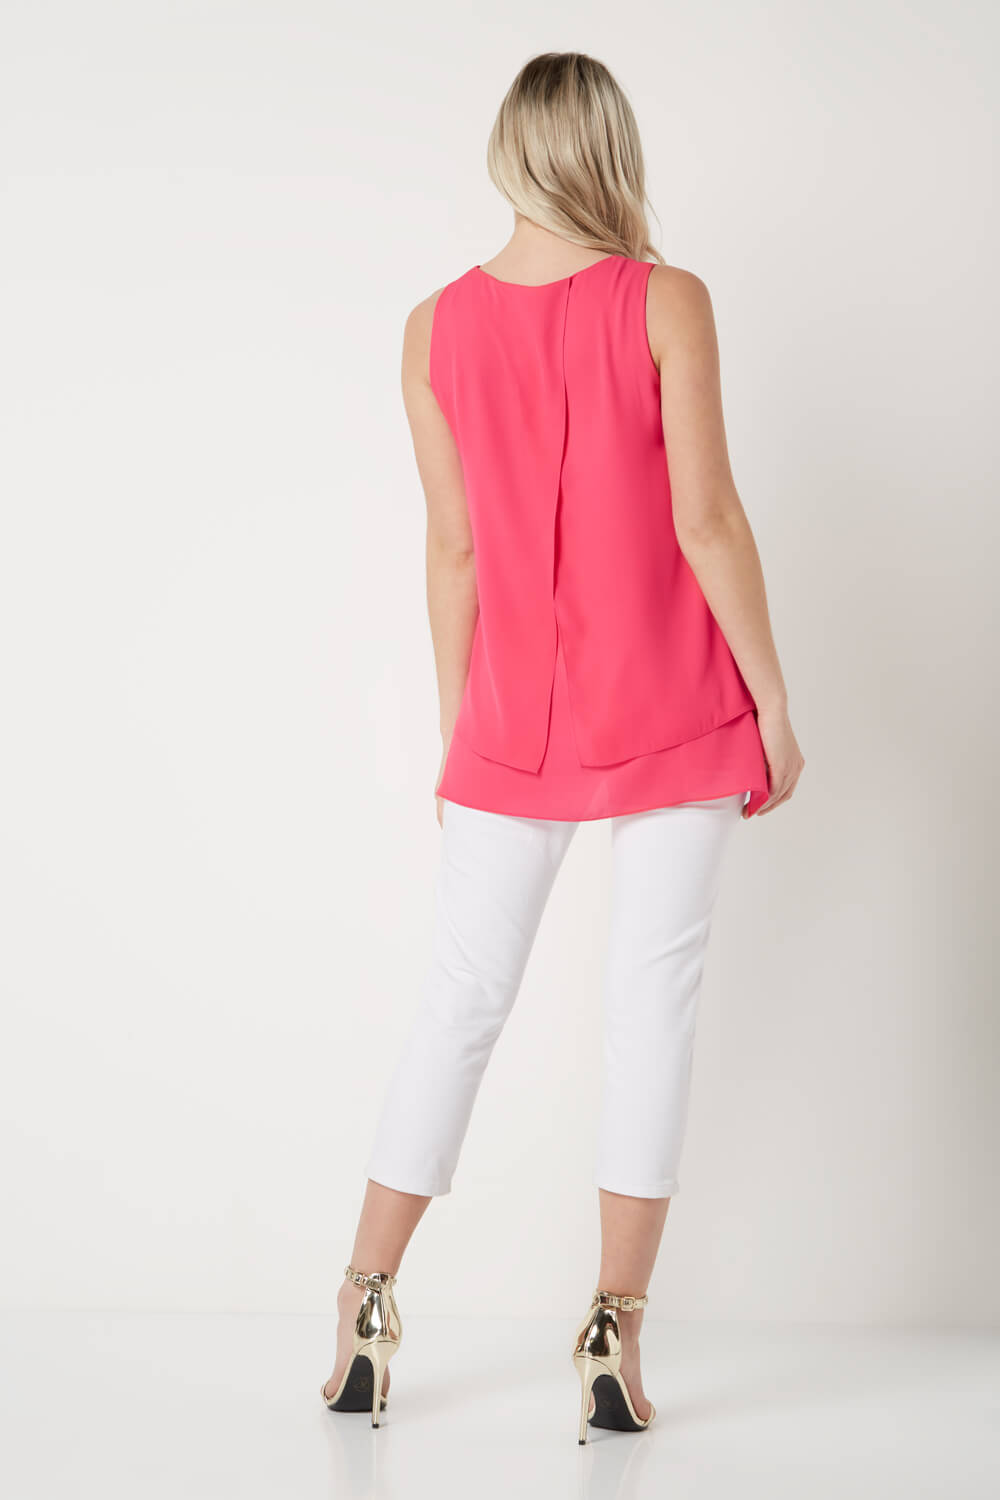 PINK Double Layer Top, Image 2 of 3